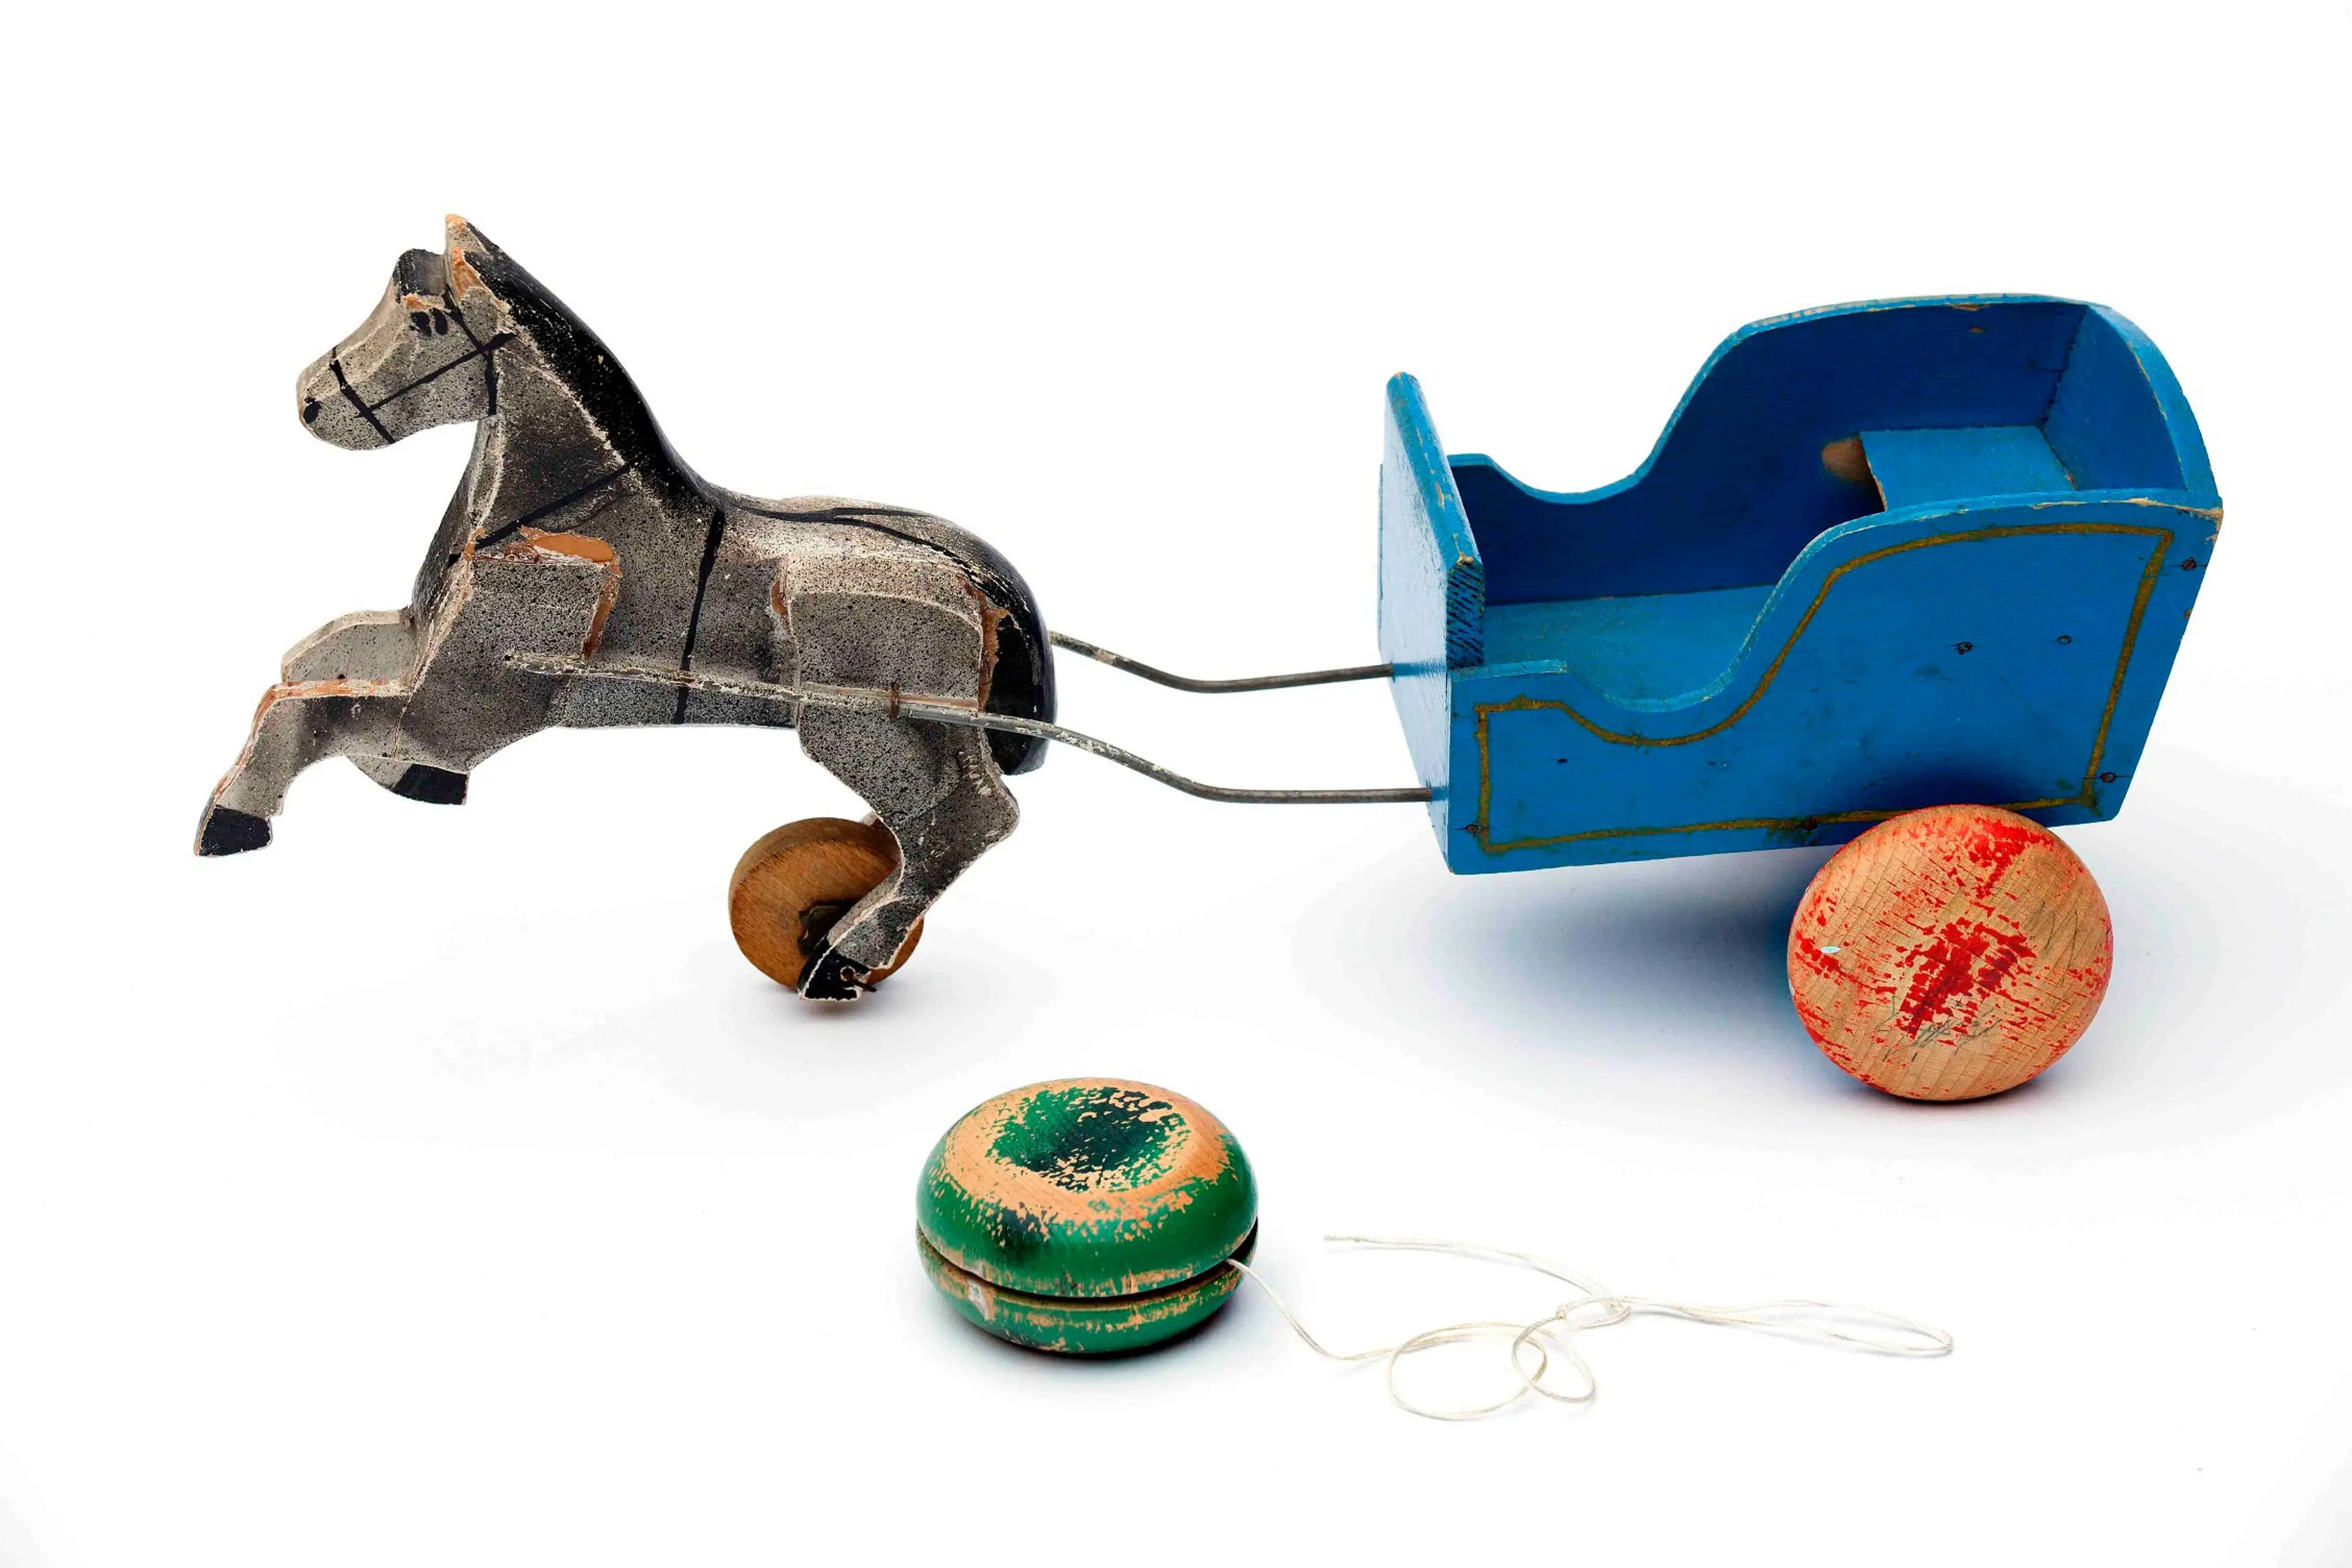 Wooden toys from the early 1930s